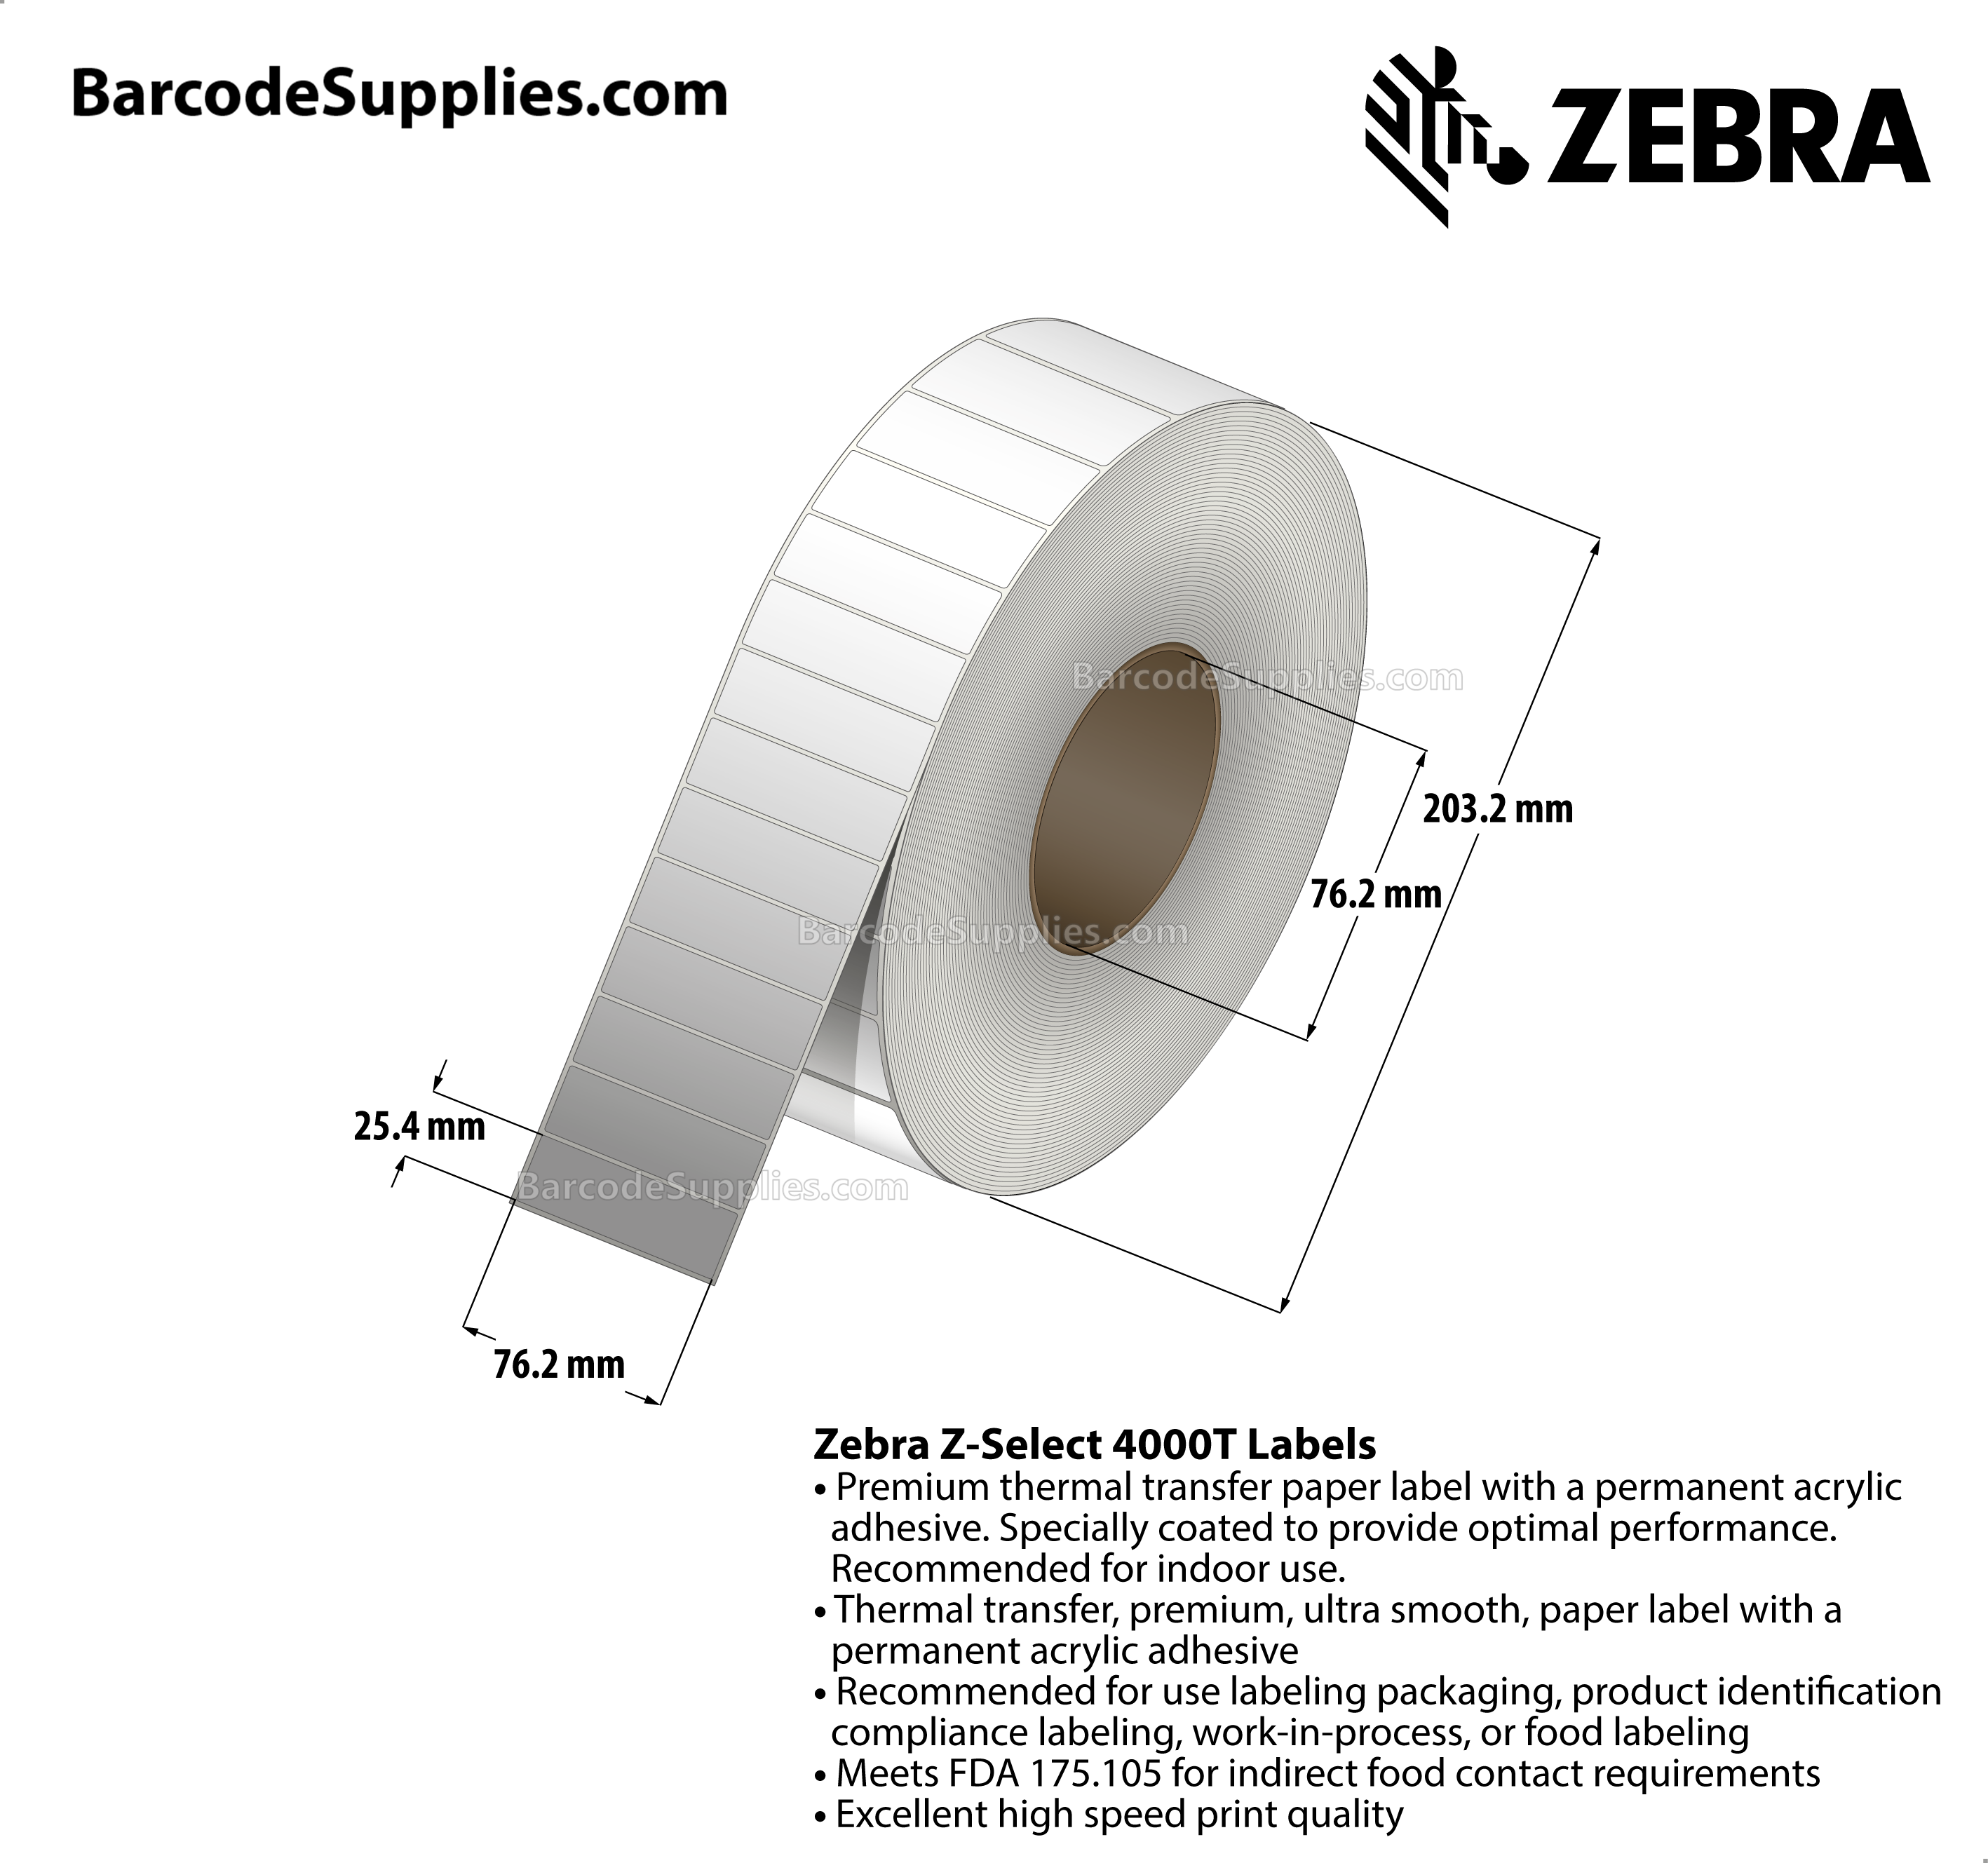 3 x 1 Thermal Transfer White Z-Select 4000T Labels With Permanent Adhesive - Not Perforated - 5180 Labels Per Roll - Carton Of 6 Rolls - 31080 Labels Total - MPN: 72284